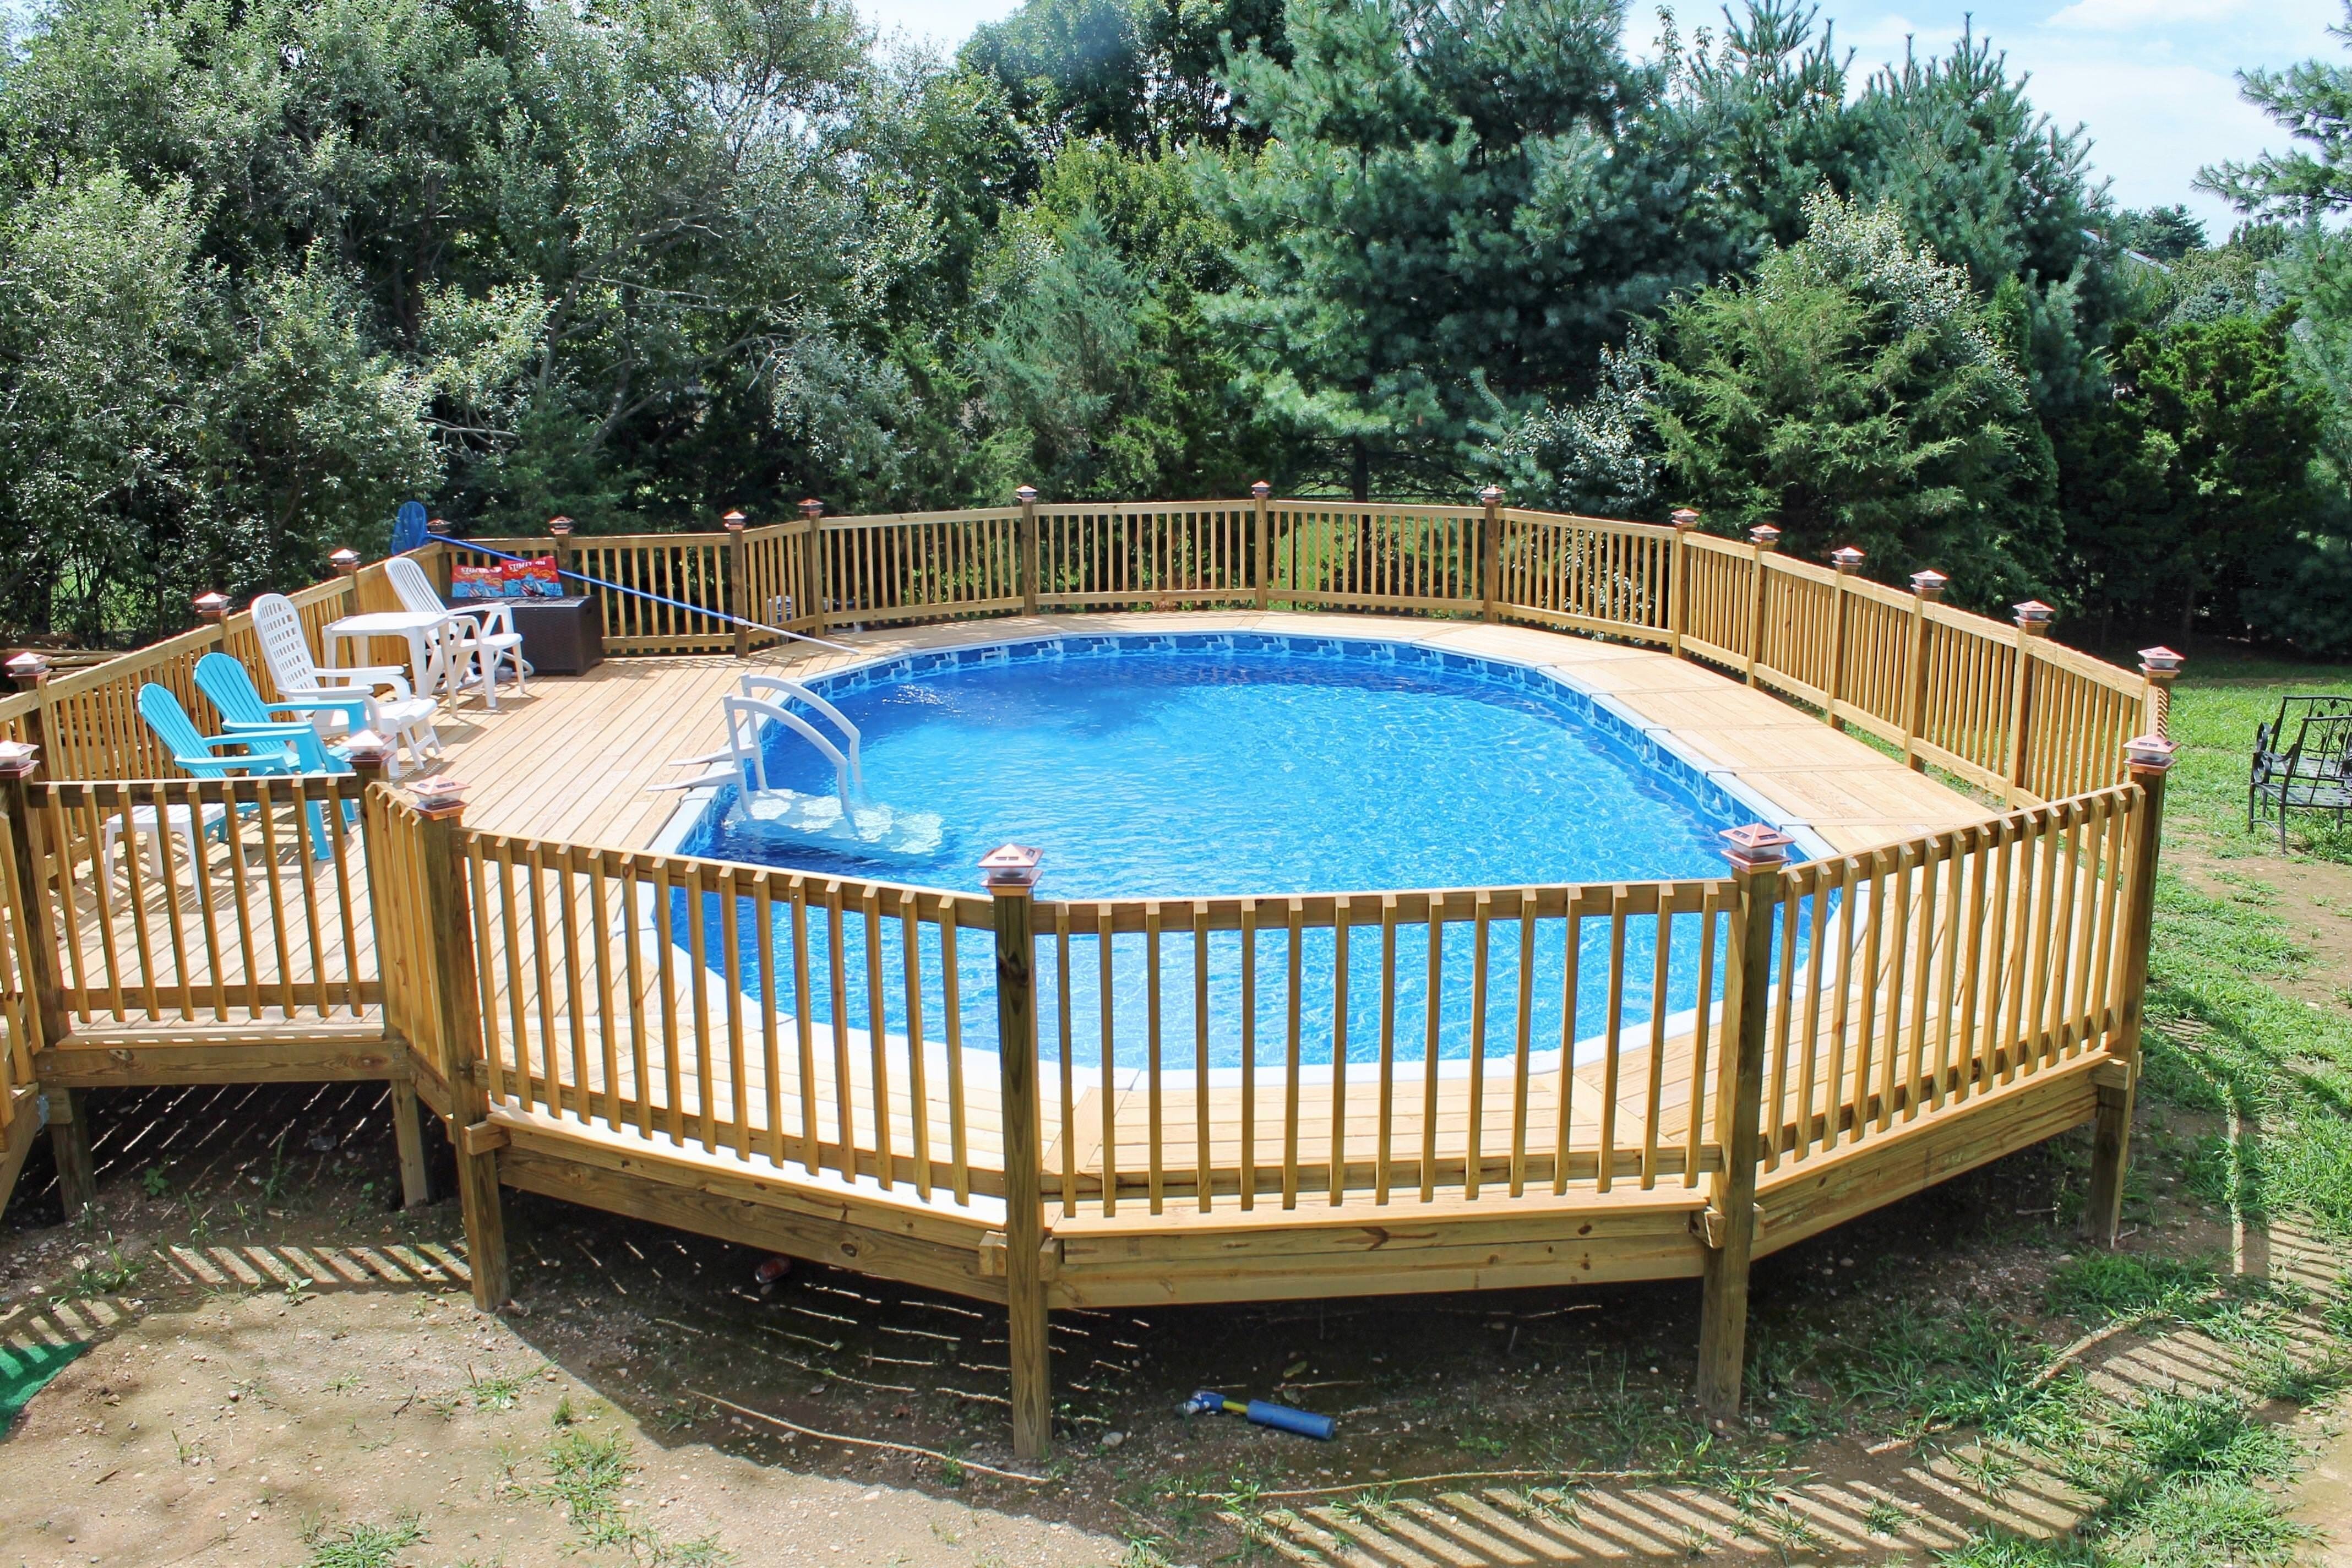 10 Unique Above Ground Pool Fencing Ideas octagonal above ground swimming pool design with wooden deck around 2022